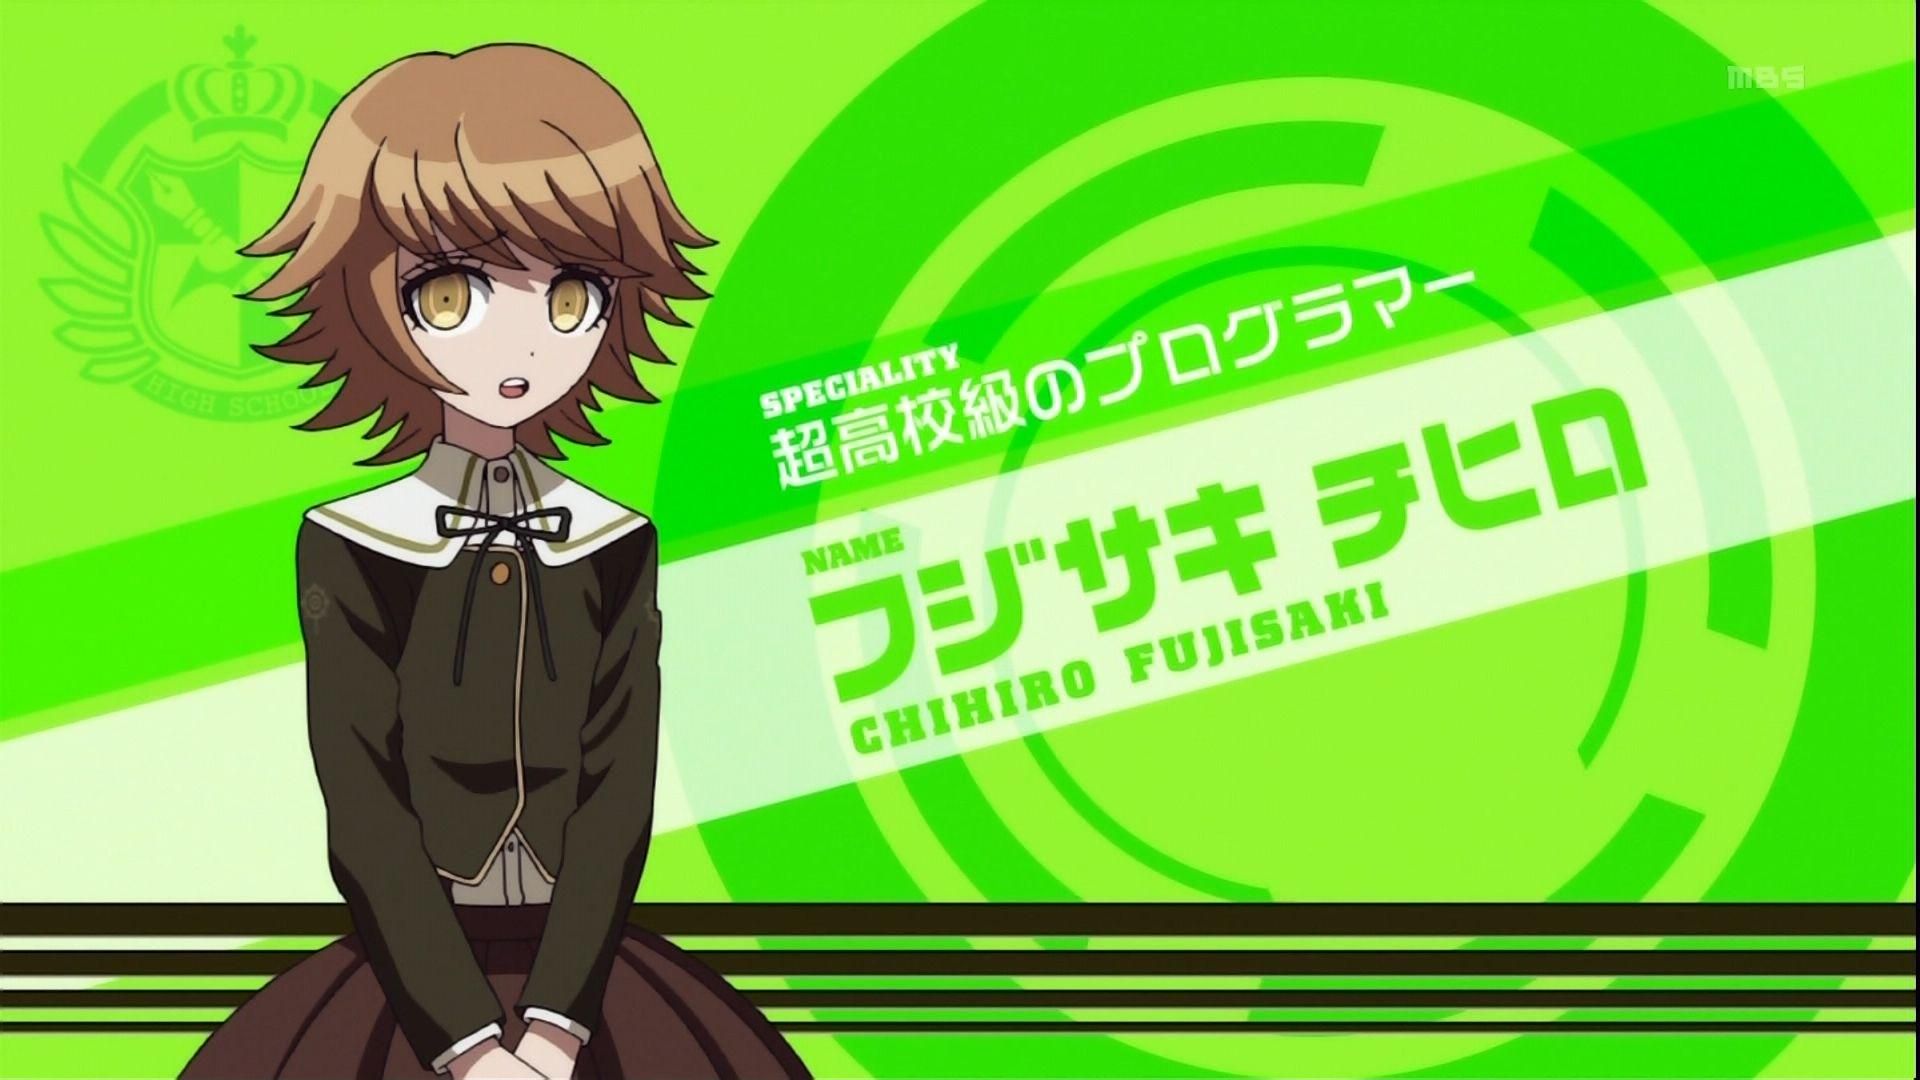 A girl with brown hair and yellow eyes in a school uniform sitting on a bench - Danganronpa